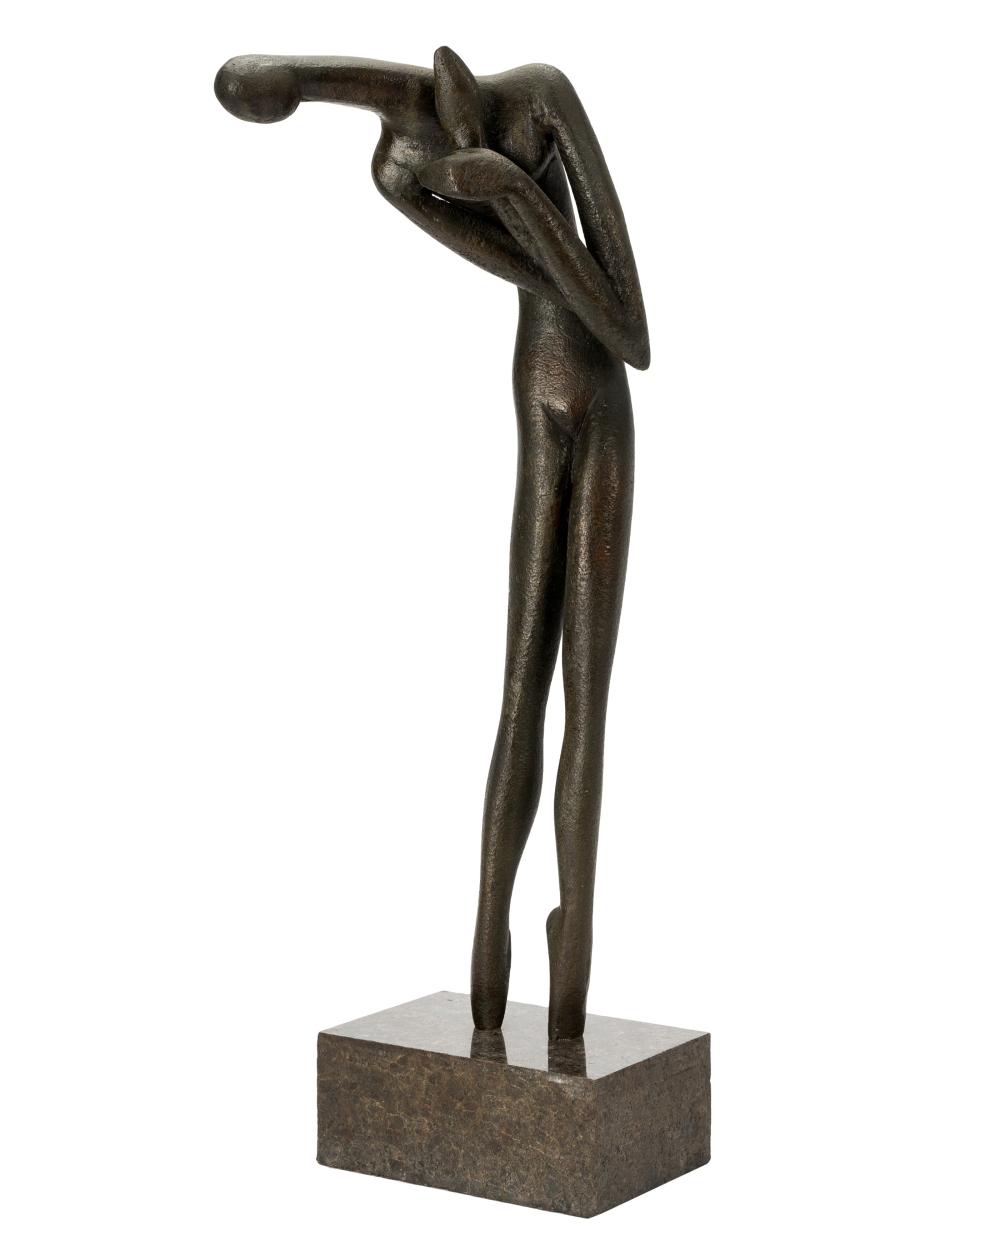 MANUEL CARBONELL (1918-2011): STANDING